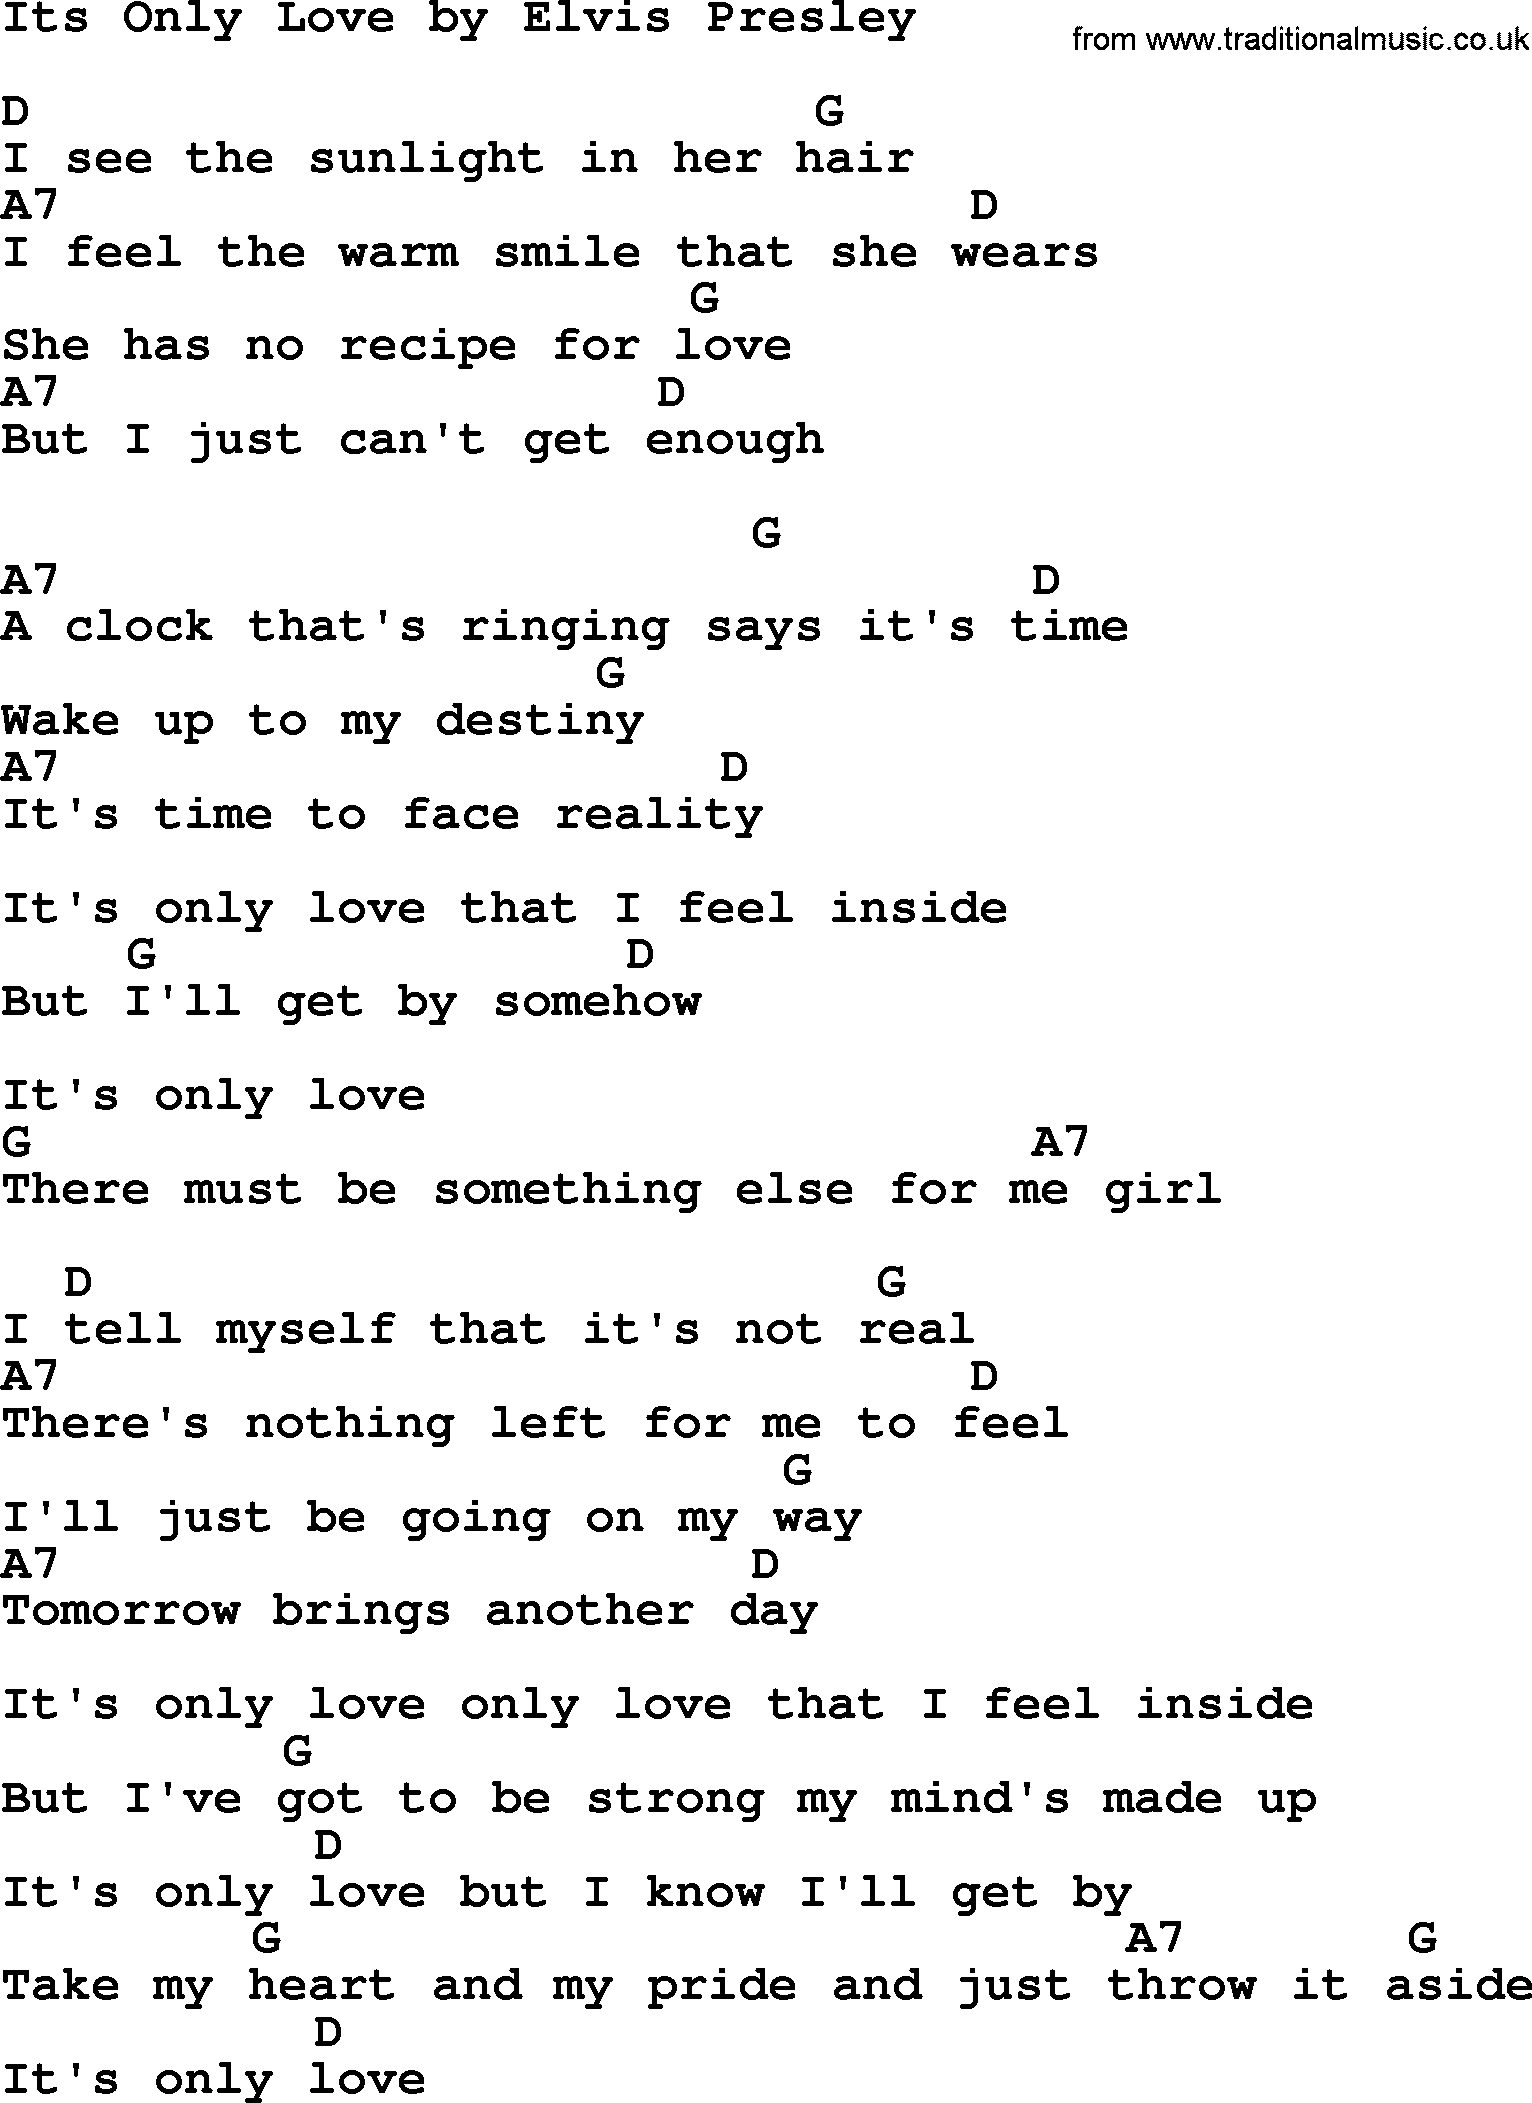 Elvis Presley song: Its Only Love, lyrics and chords